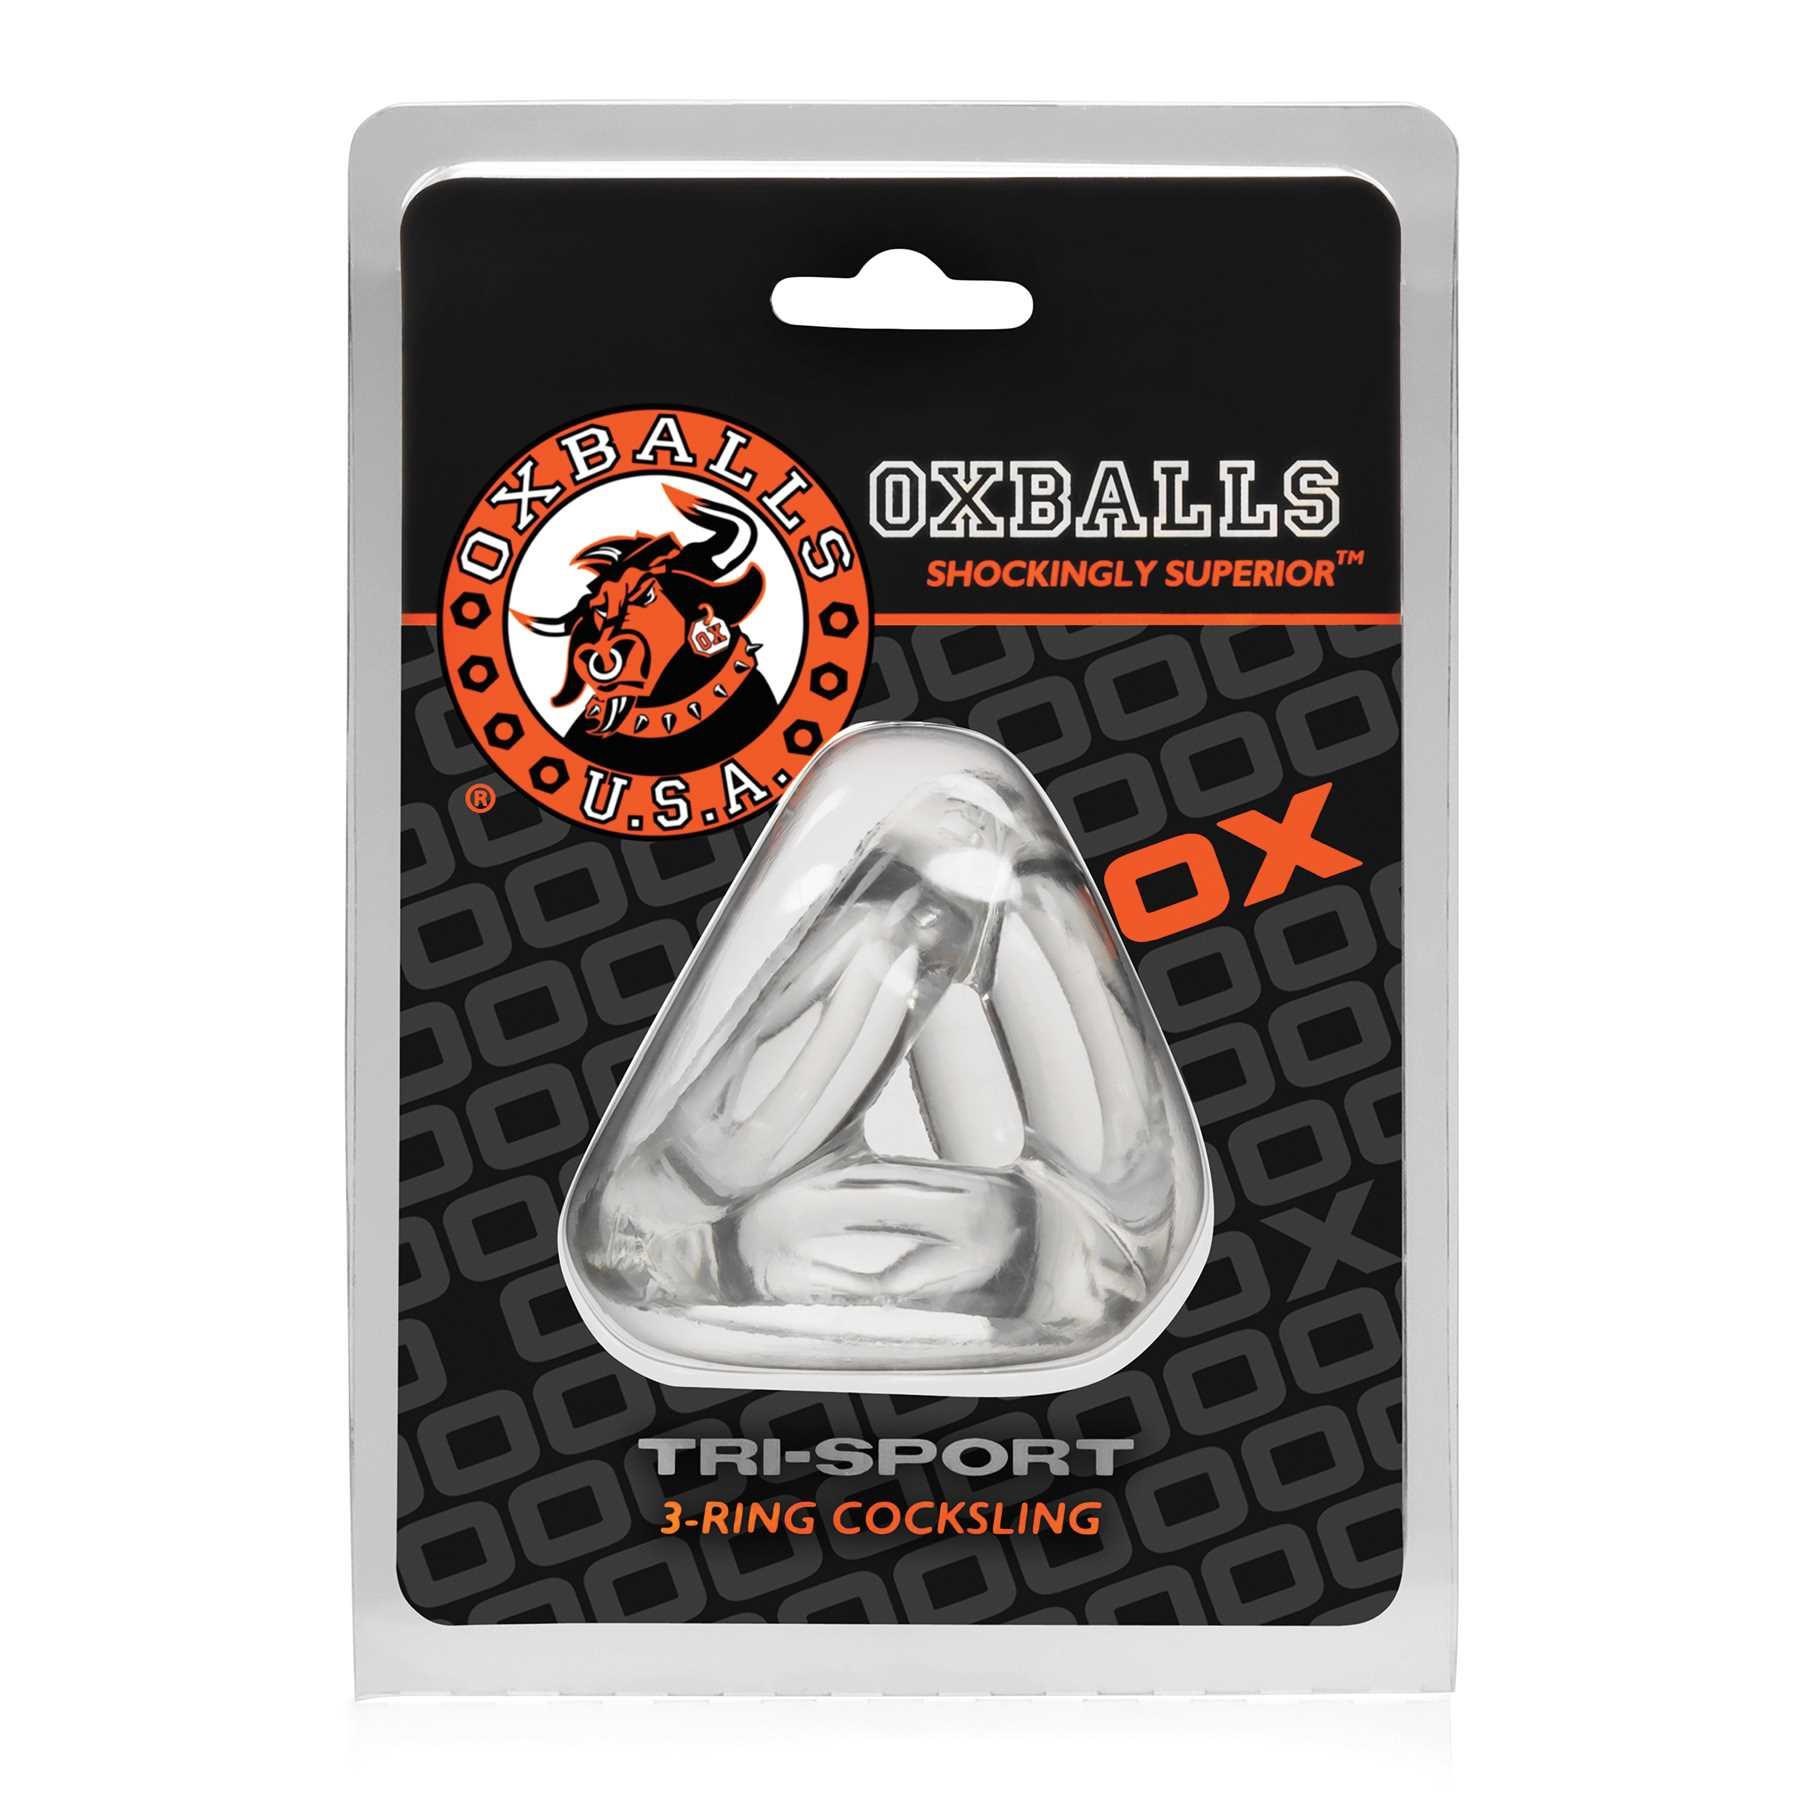 Tri-Sport 3-ring Cocksling clear in packaging